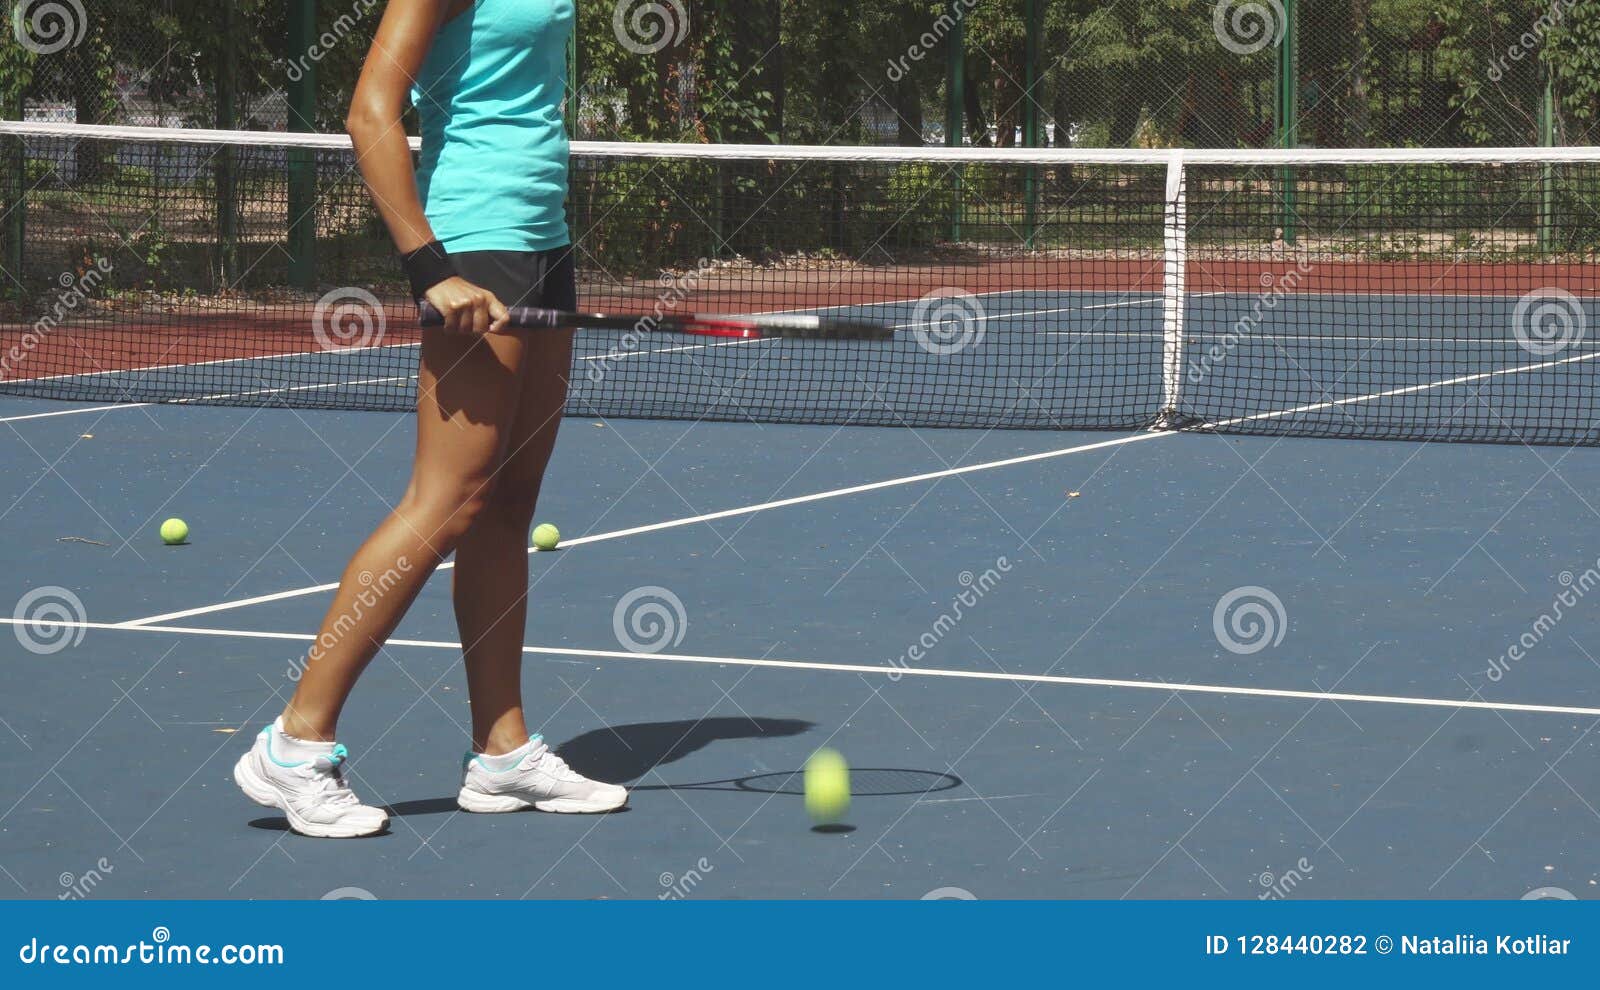 sneakers to play tennis